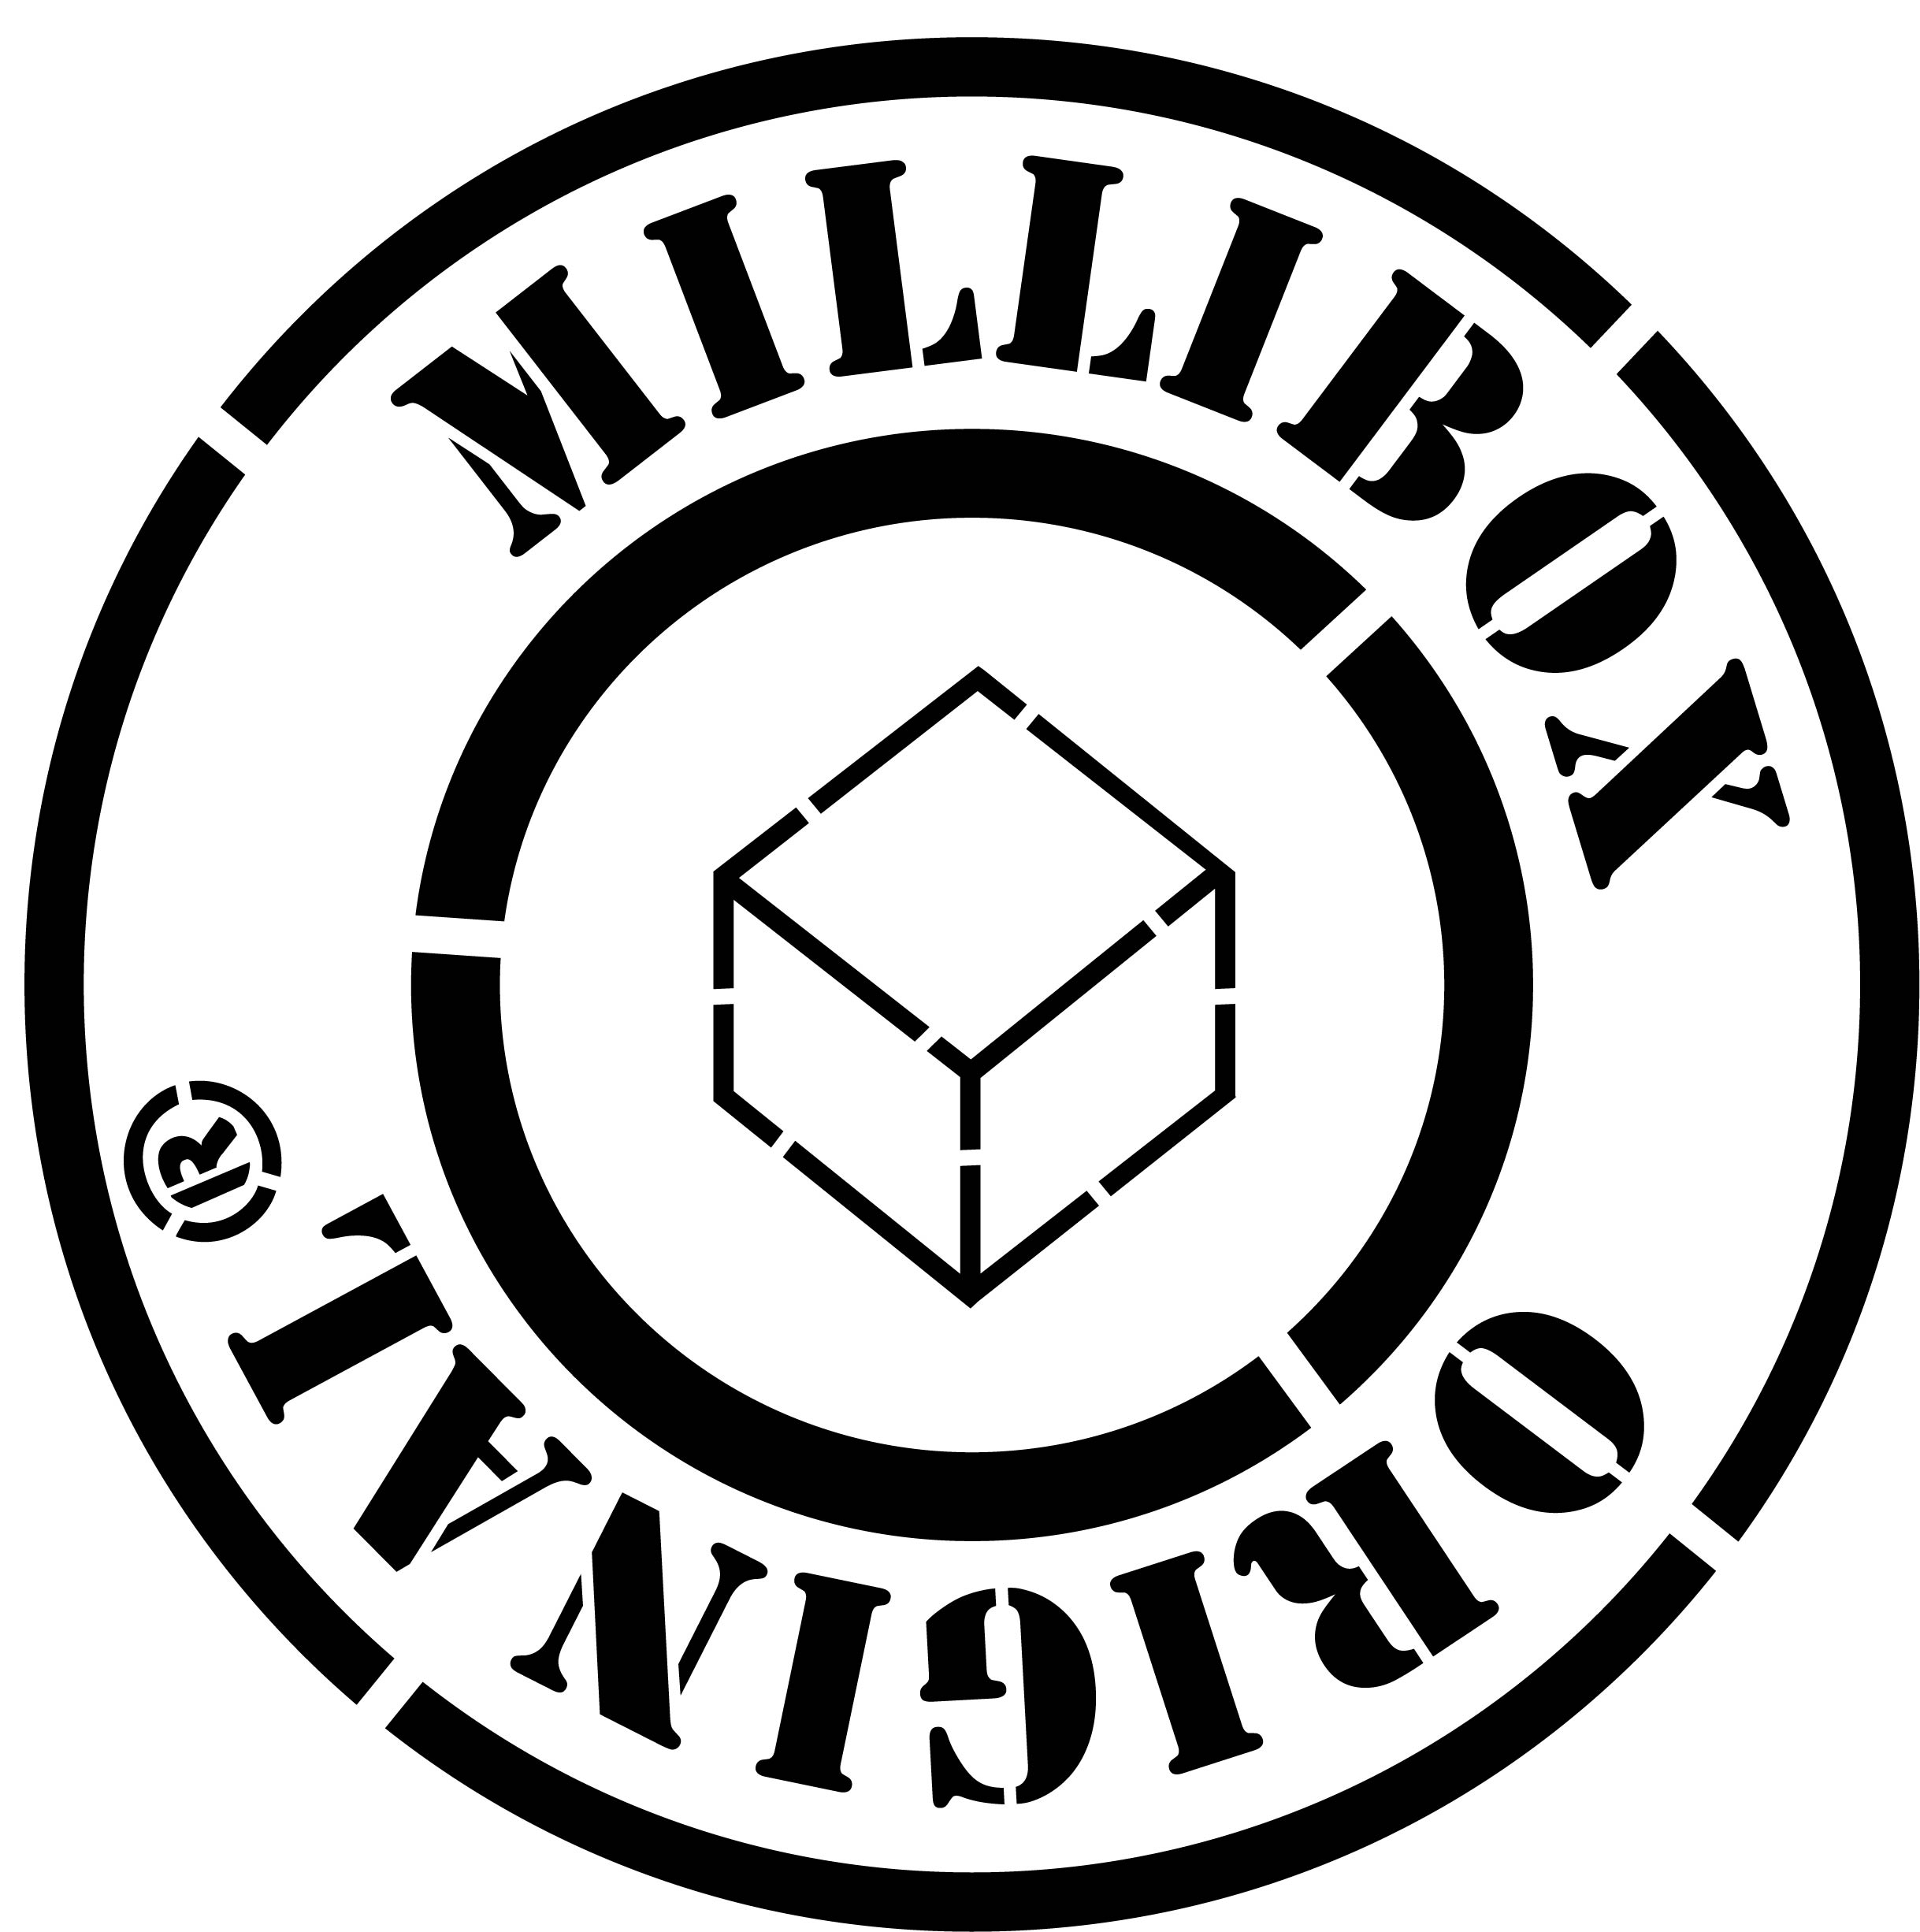 MilliBox (MilliBox is a Trademark of Milliwave Silicon Solutions Inc)